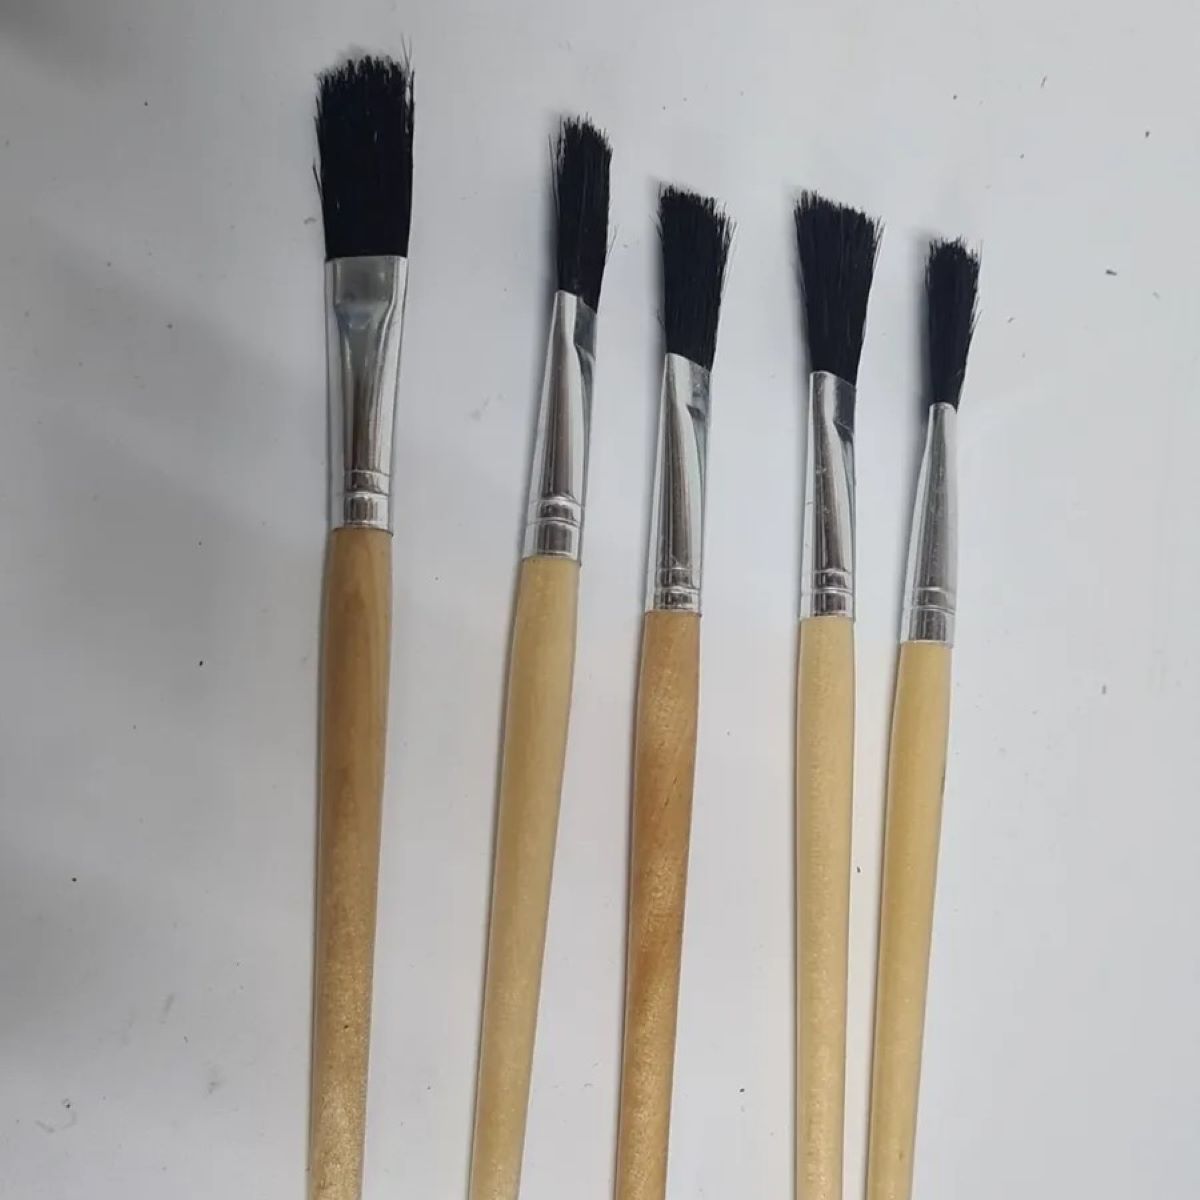 School Smart Black Bristle Paint Brushes with Short Wooden Handles for  School and Arts and Crafts Use, Bulk Set of 24